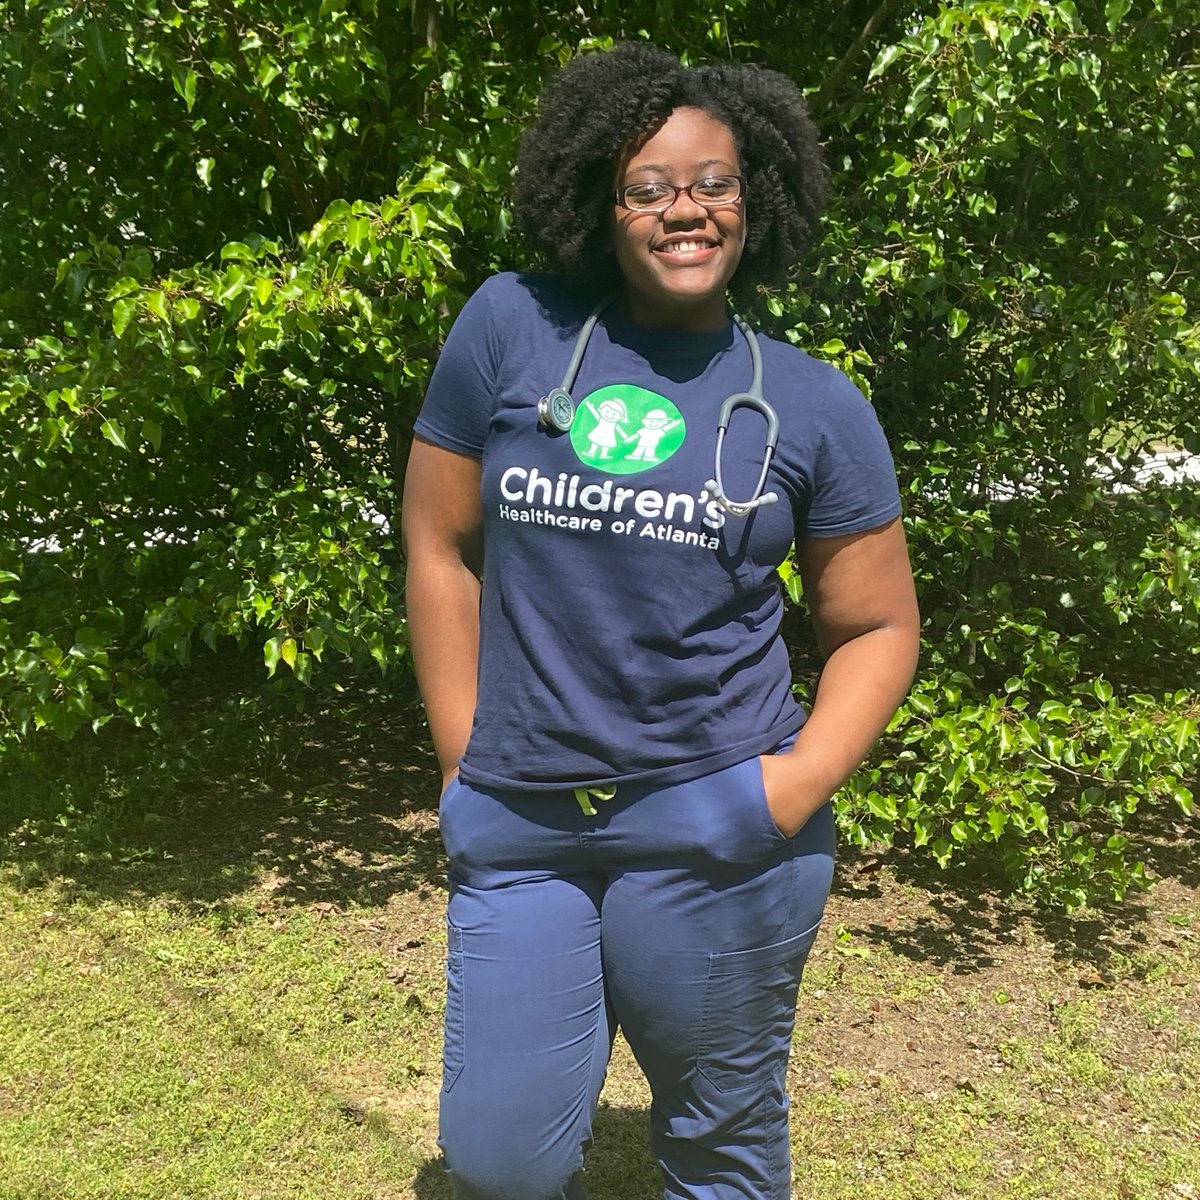 Six years ago, Alexis fell in love with nursing after volunteering in our emergency department. Today, the recent @EmoryNursing graduate is ecstatic to be returning once again—this time as a clinical nurse.